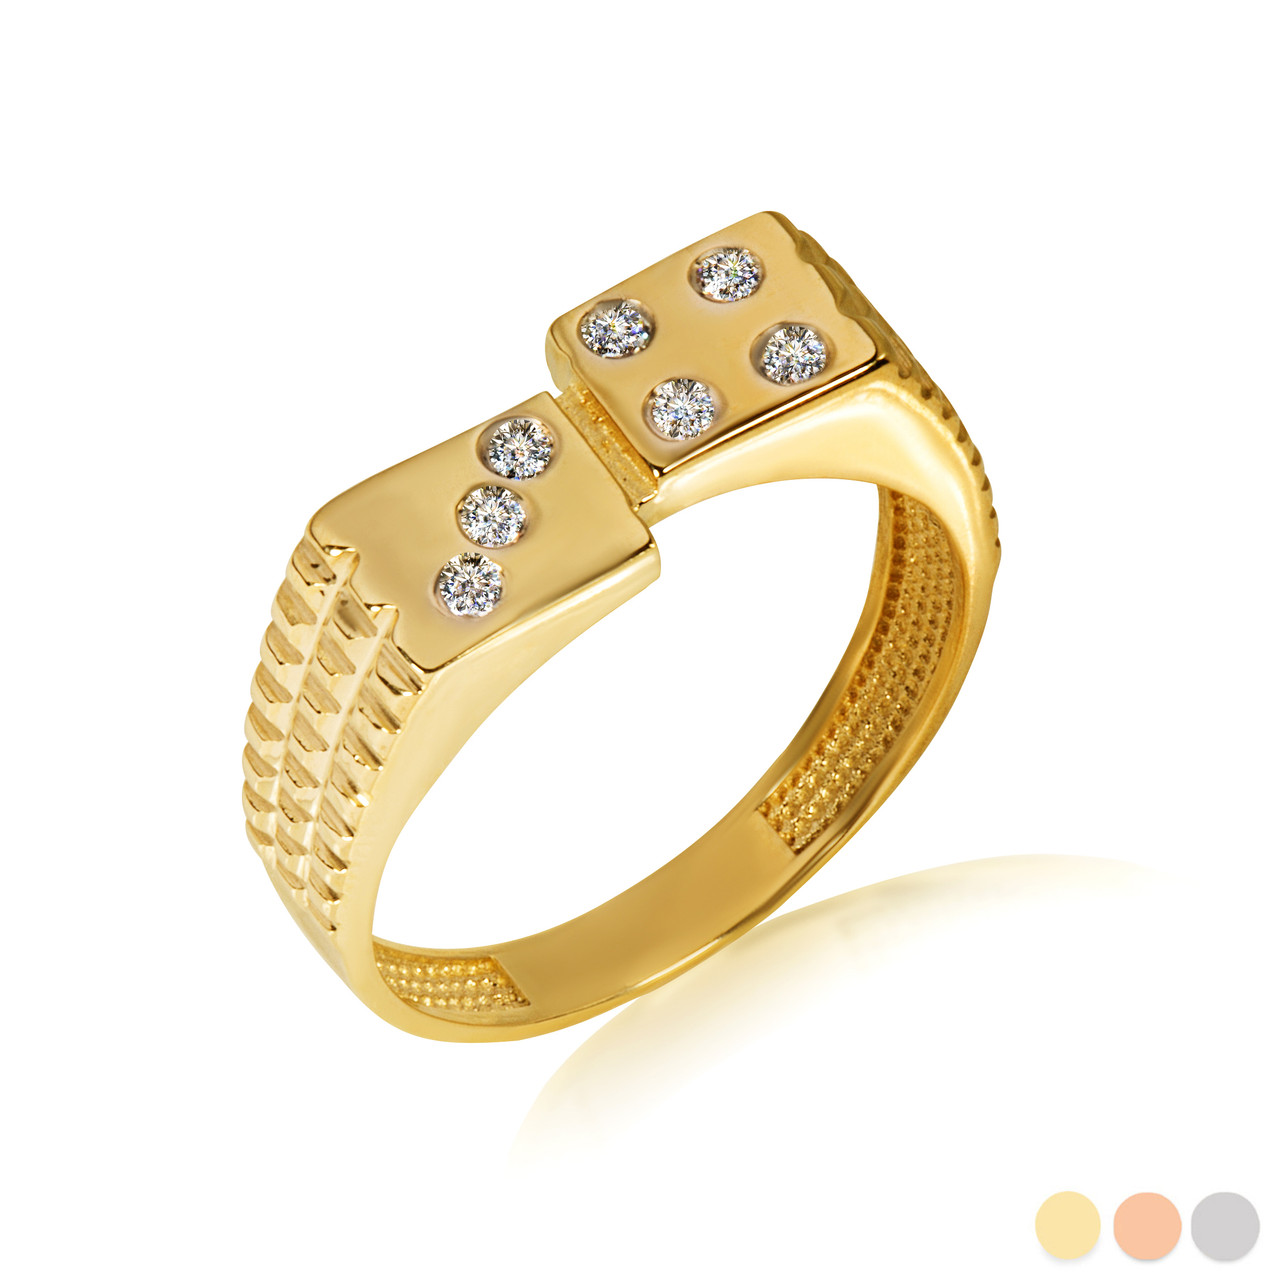 Lucky Seven 3D Dice Ribbed Ring